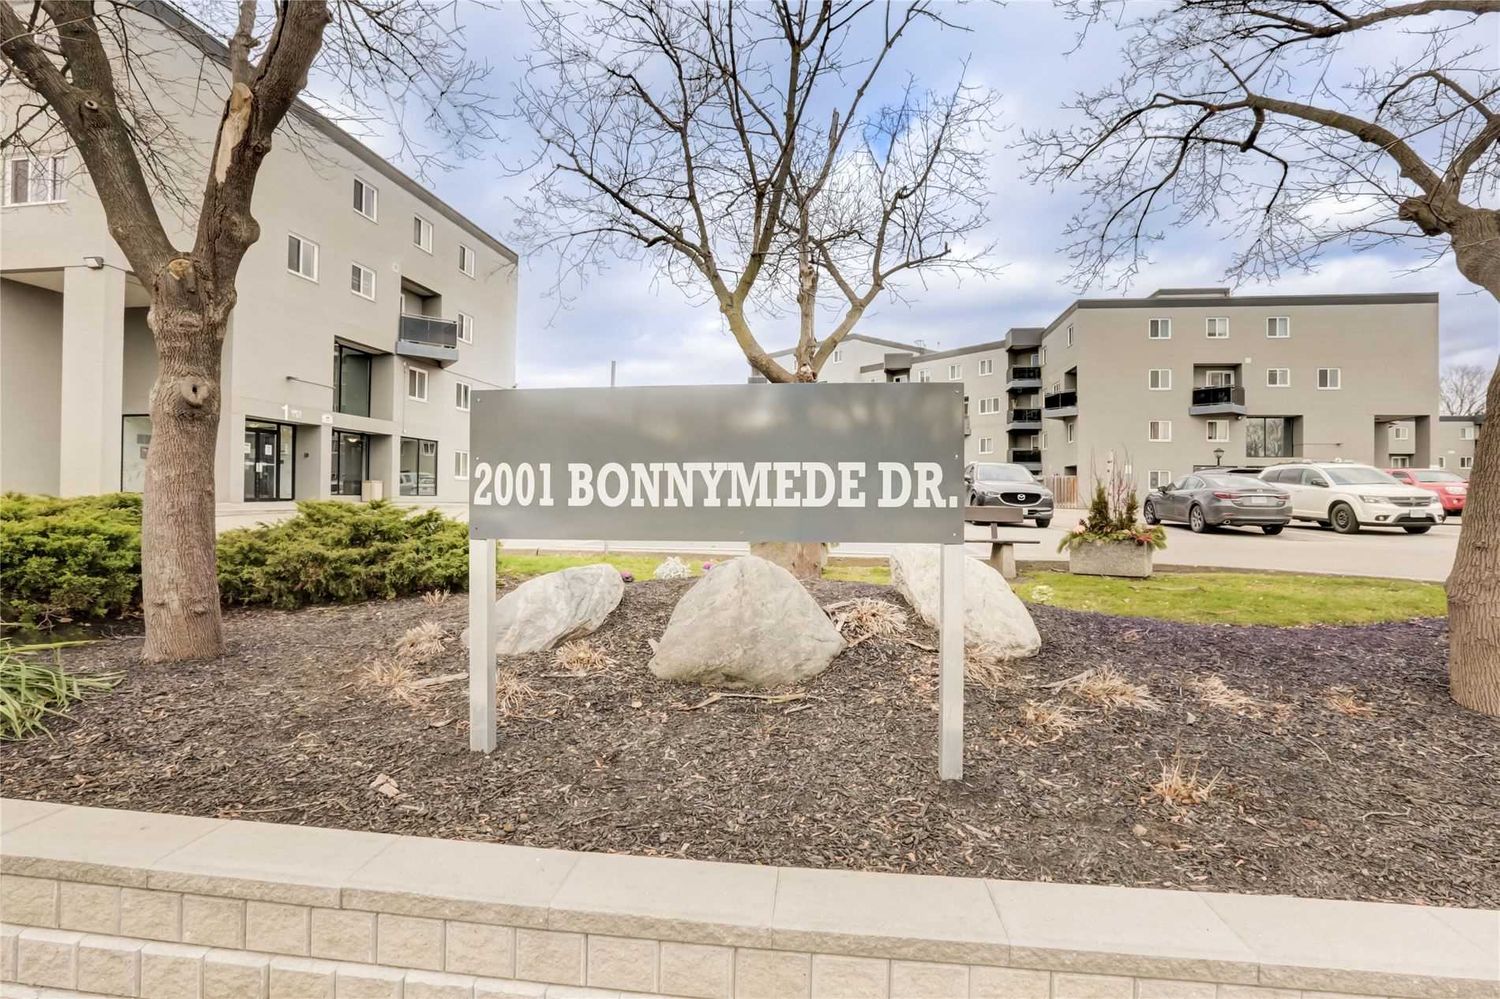 2001 Bonnymede Drive. 2001 Bonnymede Condos is located in  Mississauga, Toronto - image #1 of 2